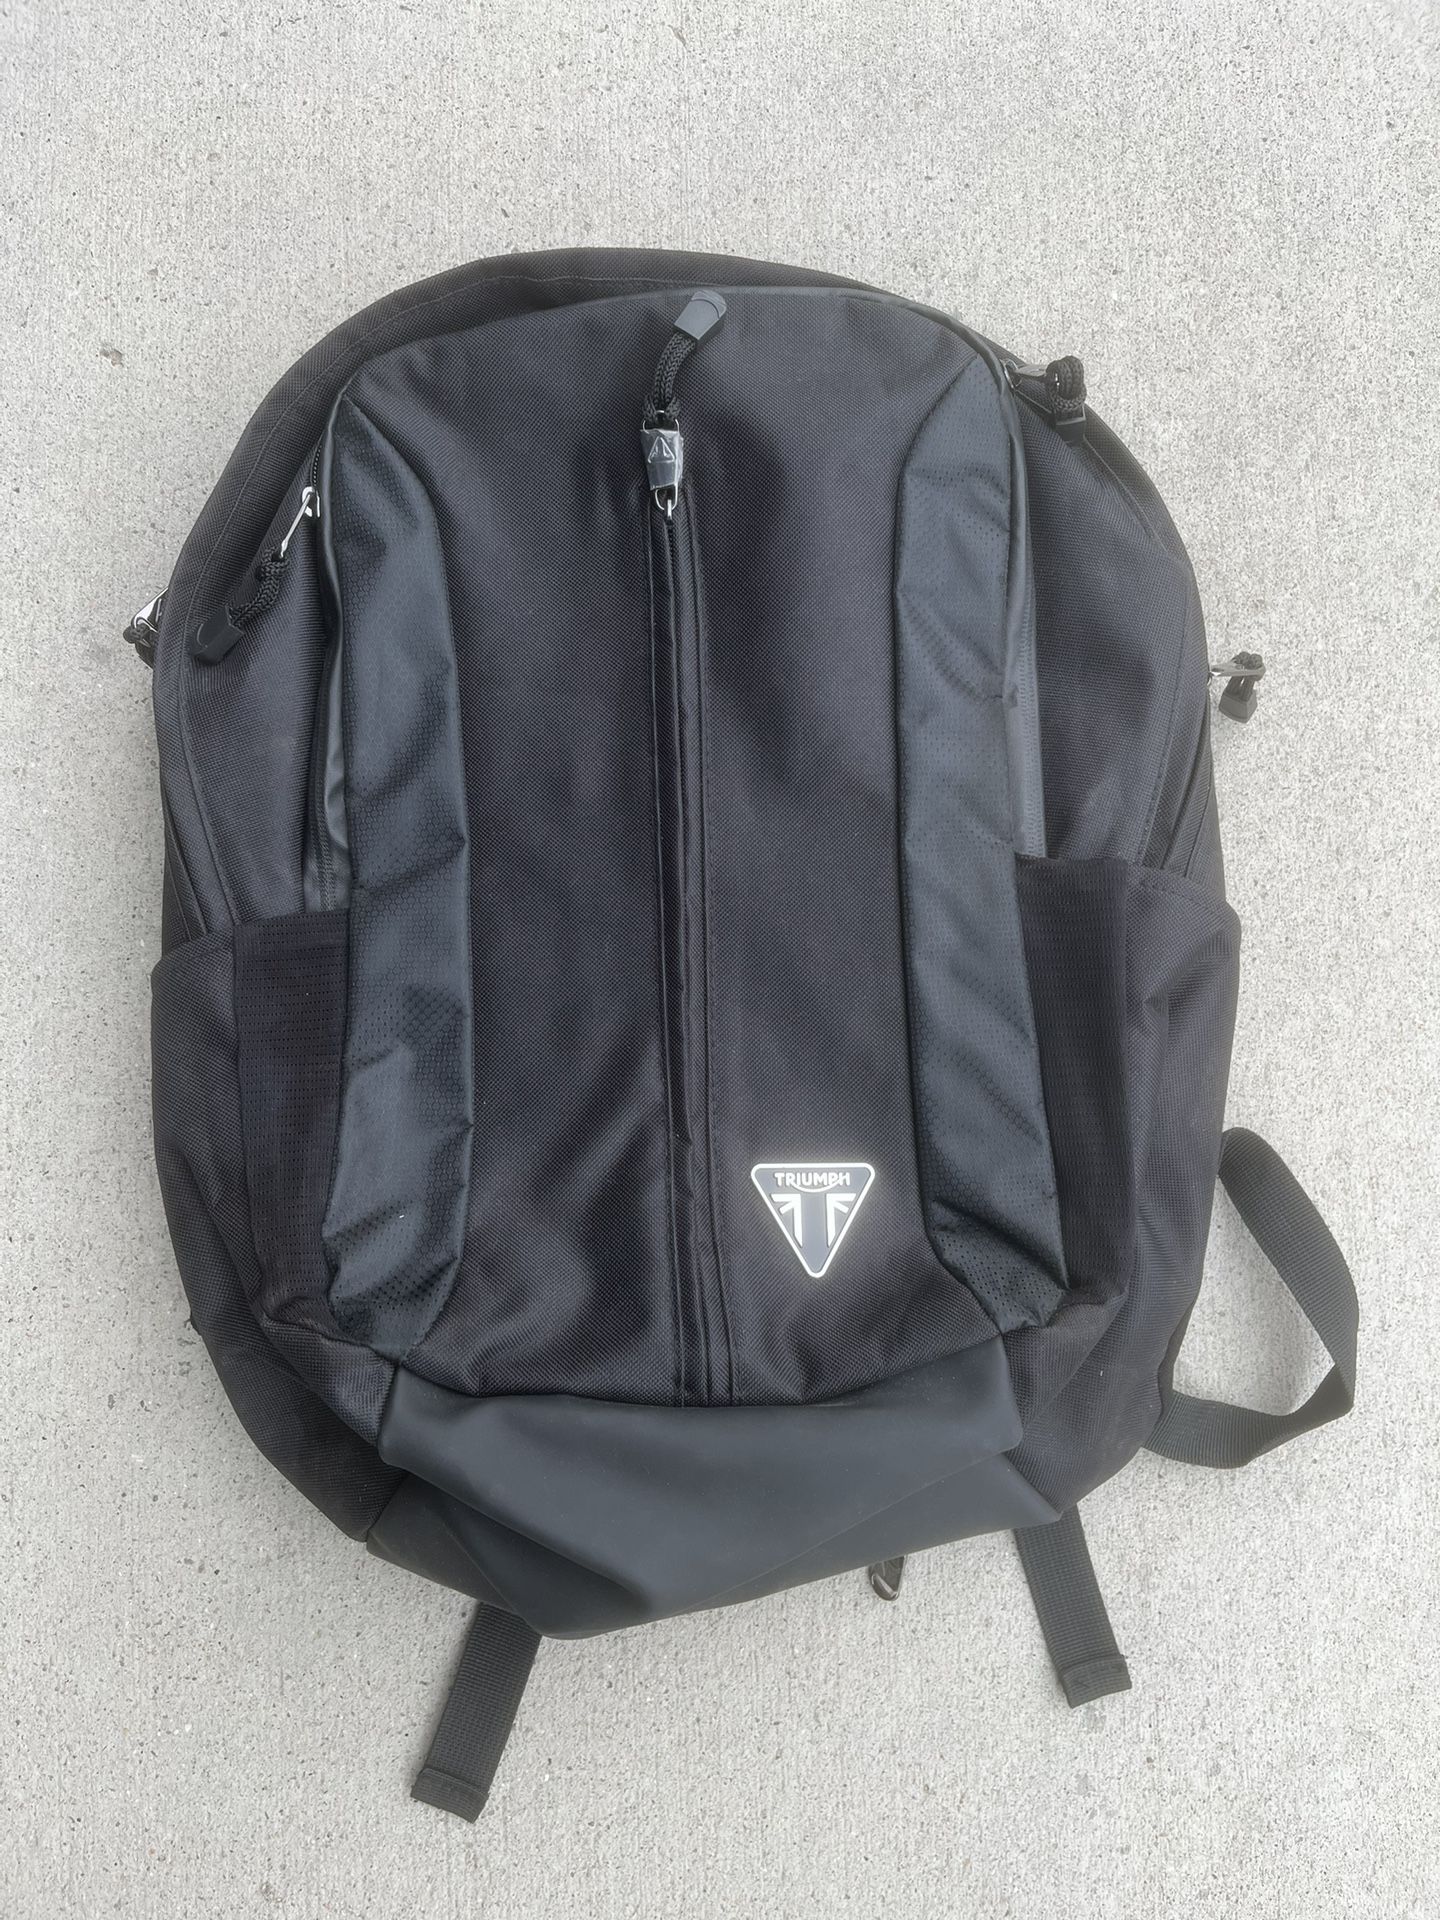 Triumph Backpack, Motorcycle Bag pack 